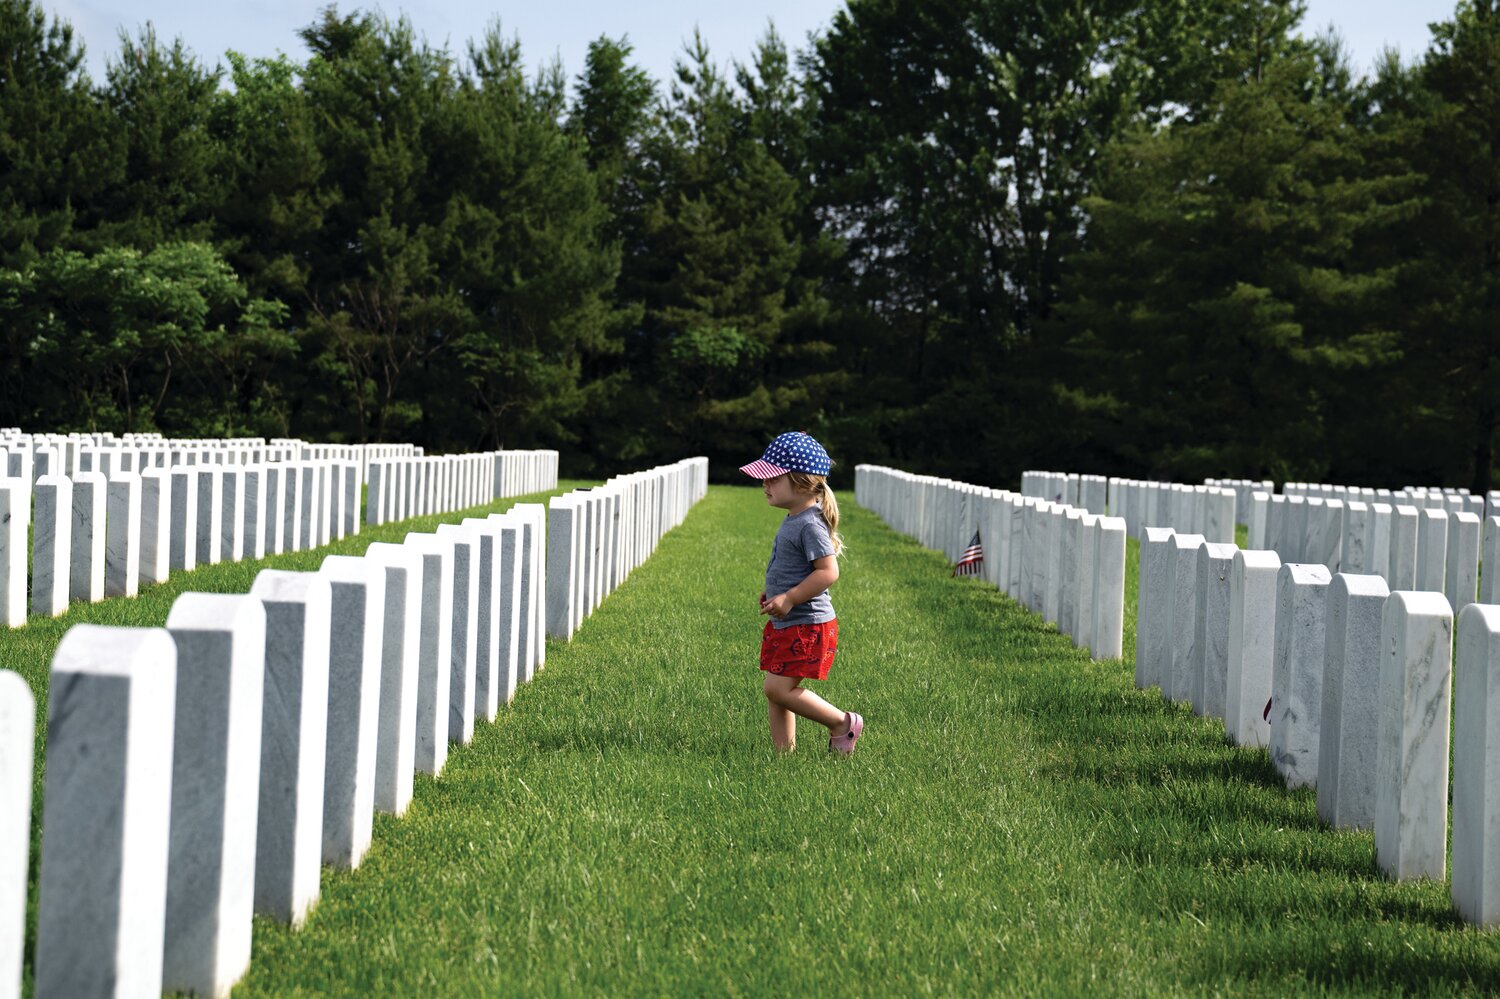 Donning a patriotic hat, a young child walks through Washington Crossing National Cemetery on Memorial Day.